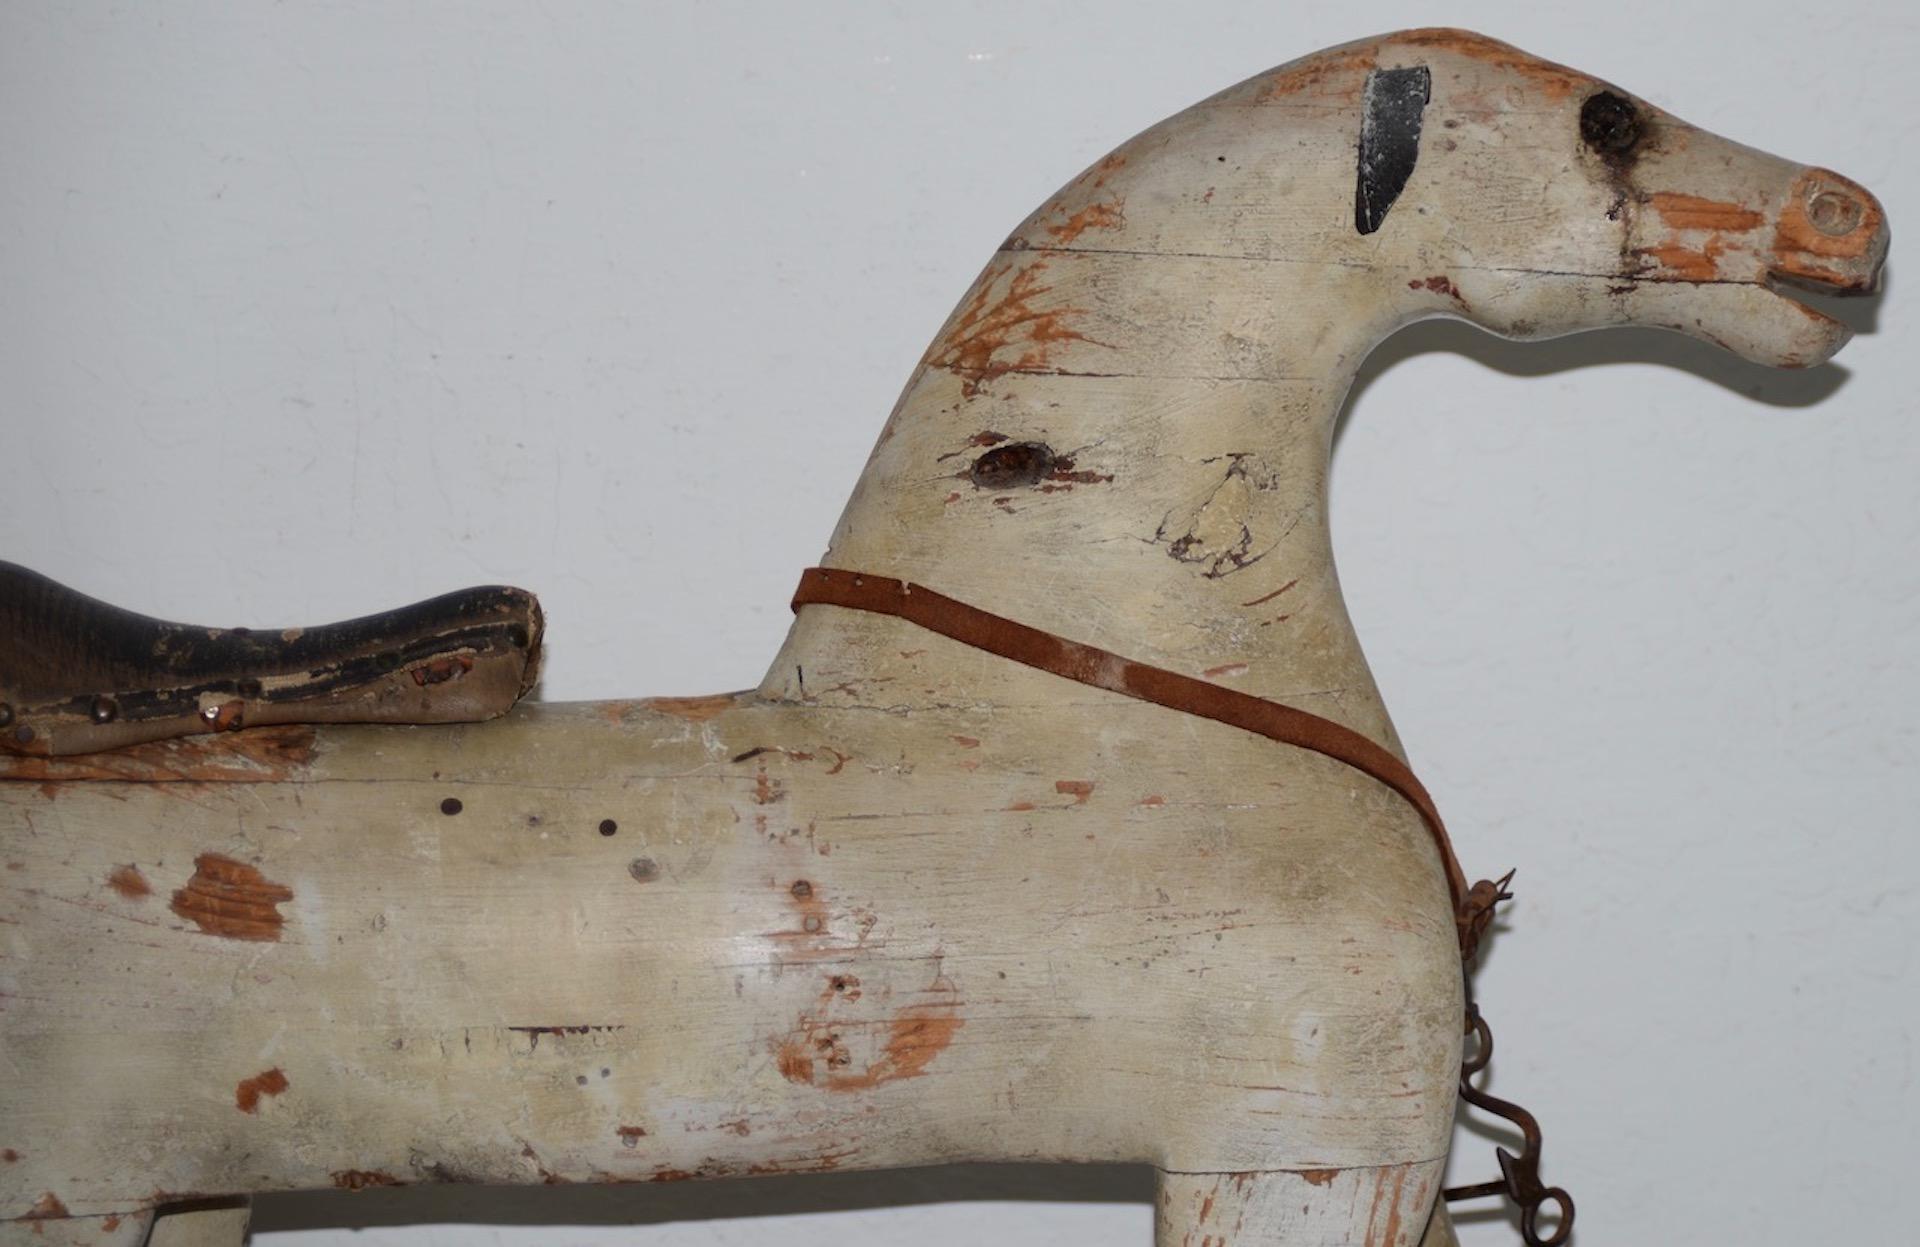 19th century American Folk Art rocking horse

Fantastic American Folk Art hand carved rocking horse with ample remains of red and white paint.

The horse has leather ears and saddle. One eye is yellow glass, the other is missing. The horse has a